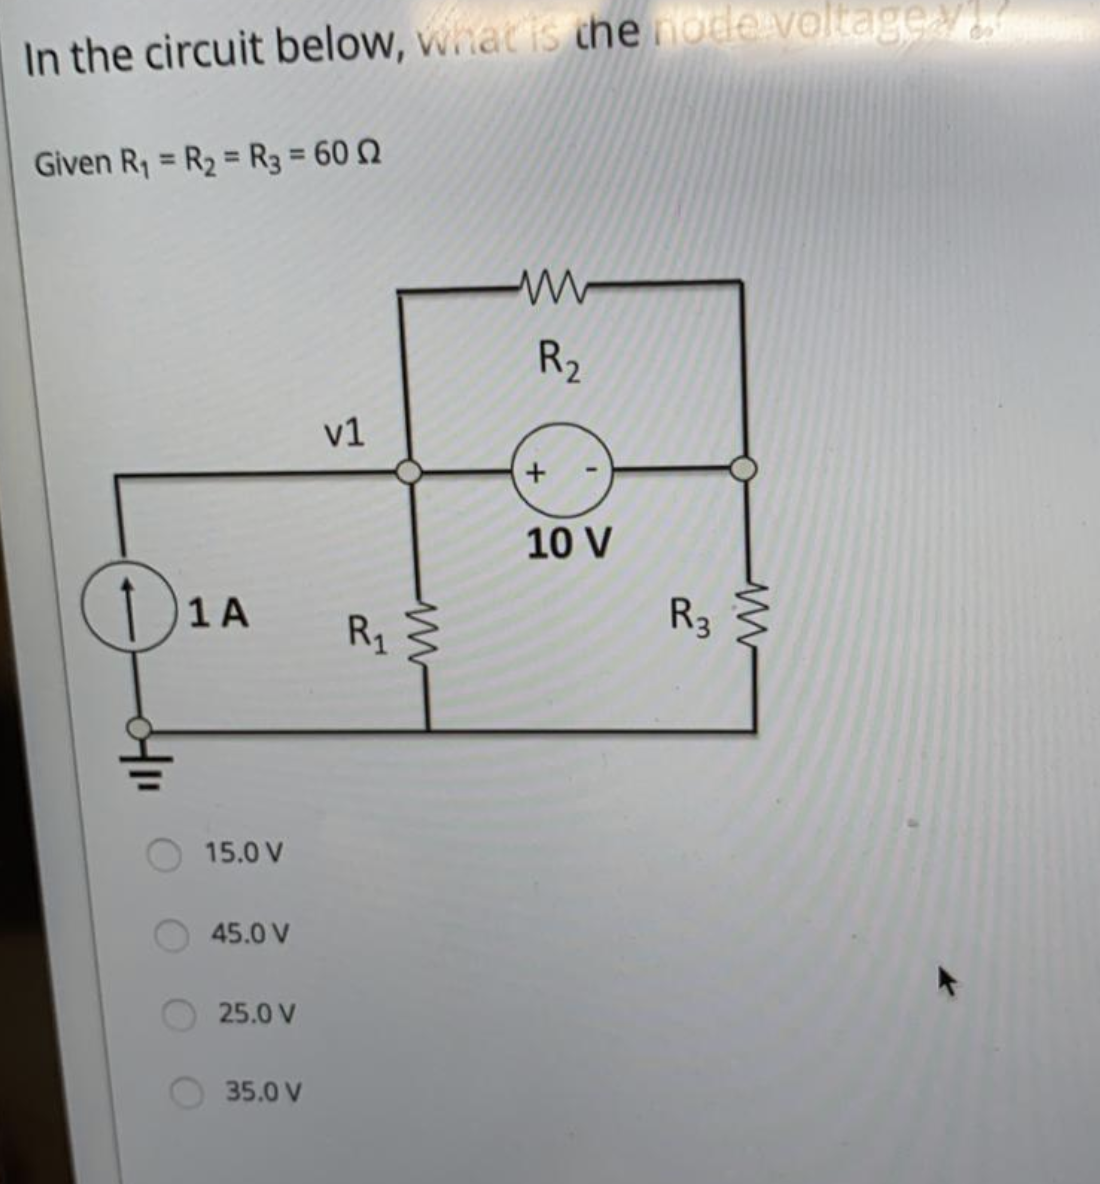 In the circuit below, whacis thendde voltage/
Given R1 = R2 = R3 = 60 Q
%3D
%3D
R2
v1
10 V
)1A
R3
R1
15.0 V
45.0 V
25.0 V
35.0 V
in
